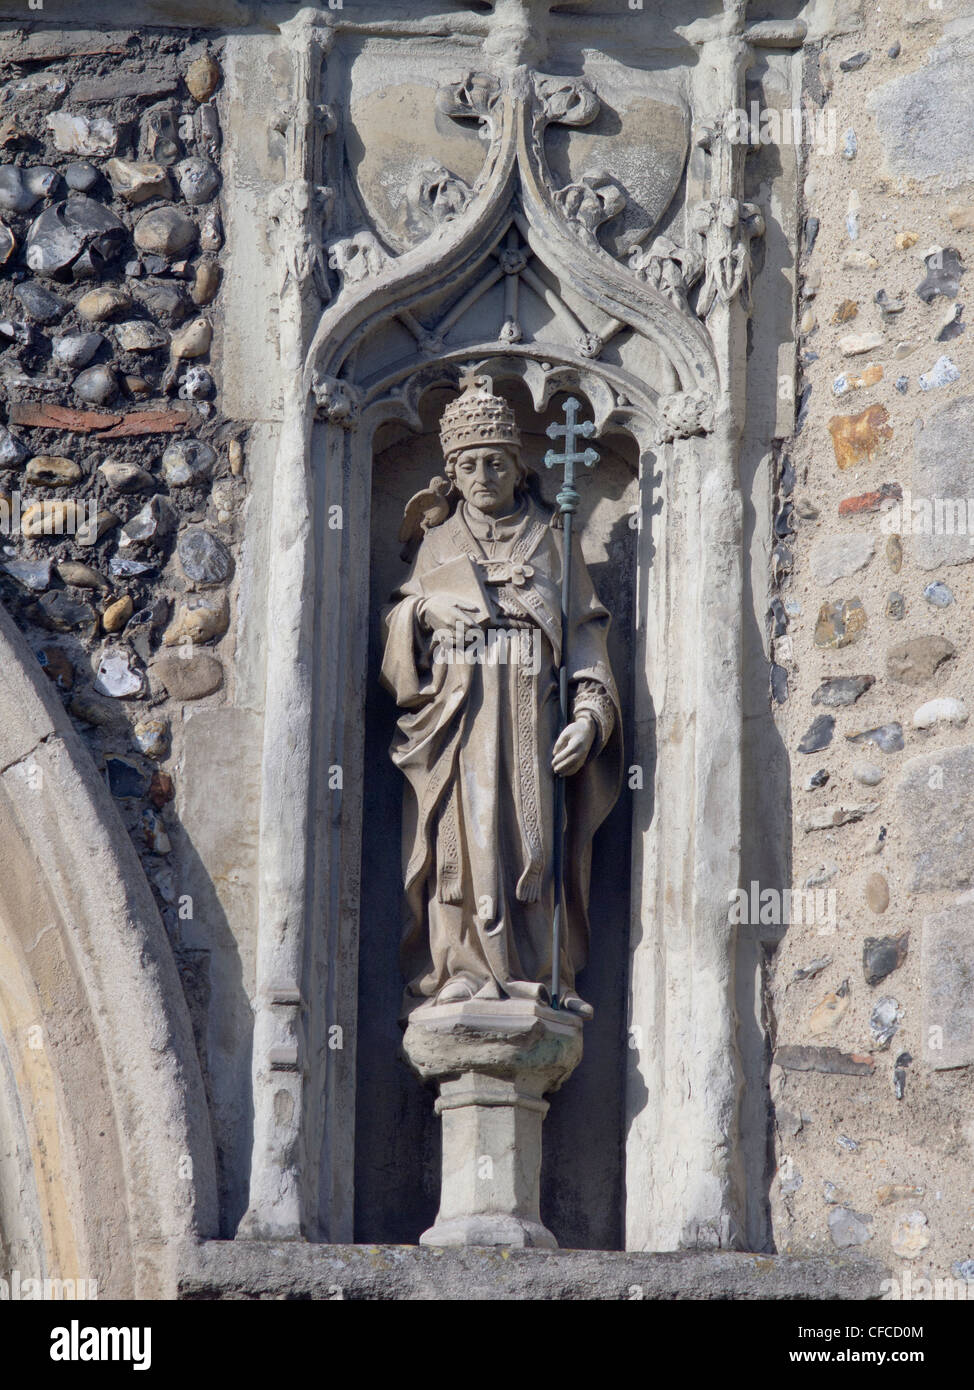 A stone statue of a Christian saint, wearing robes and holding a staff, set into the wall of a church. Stock Photo